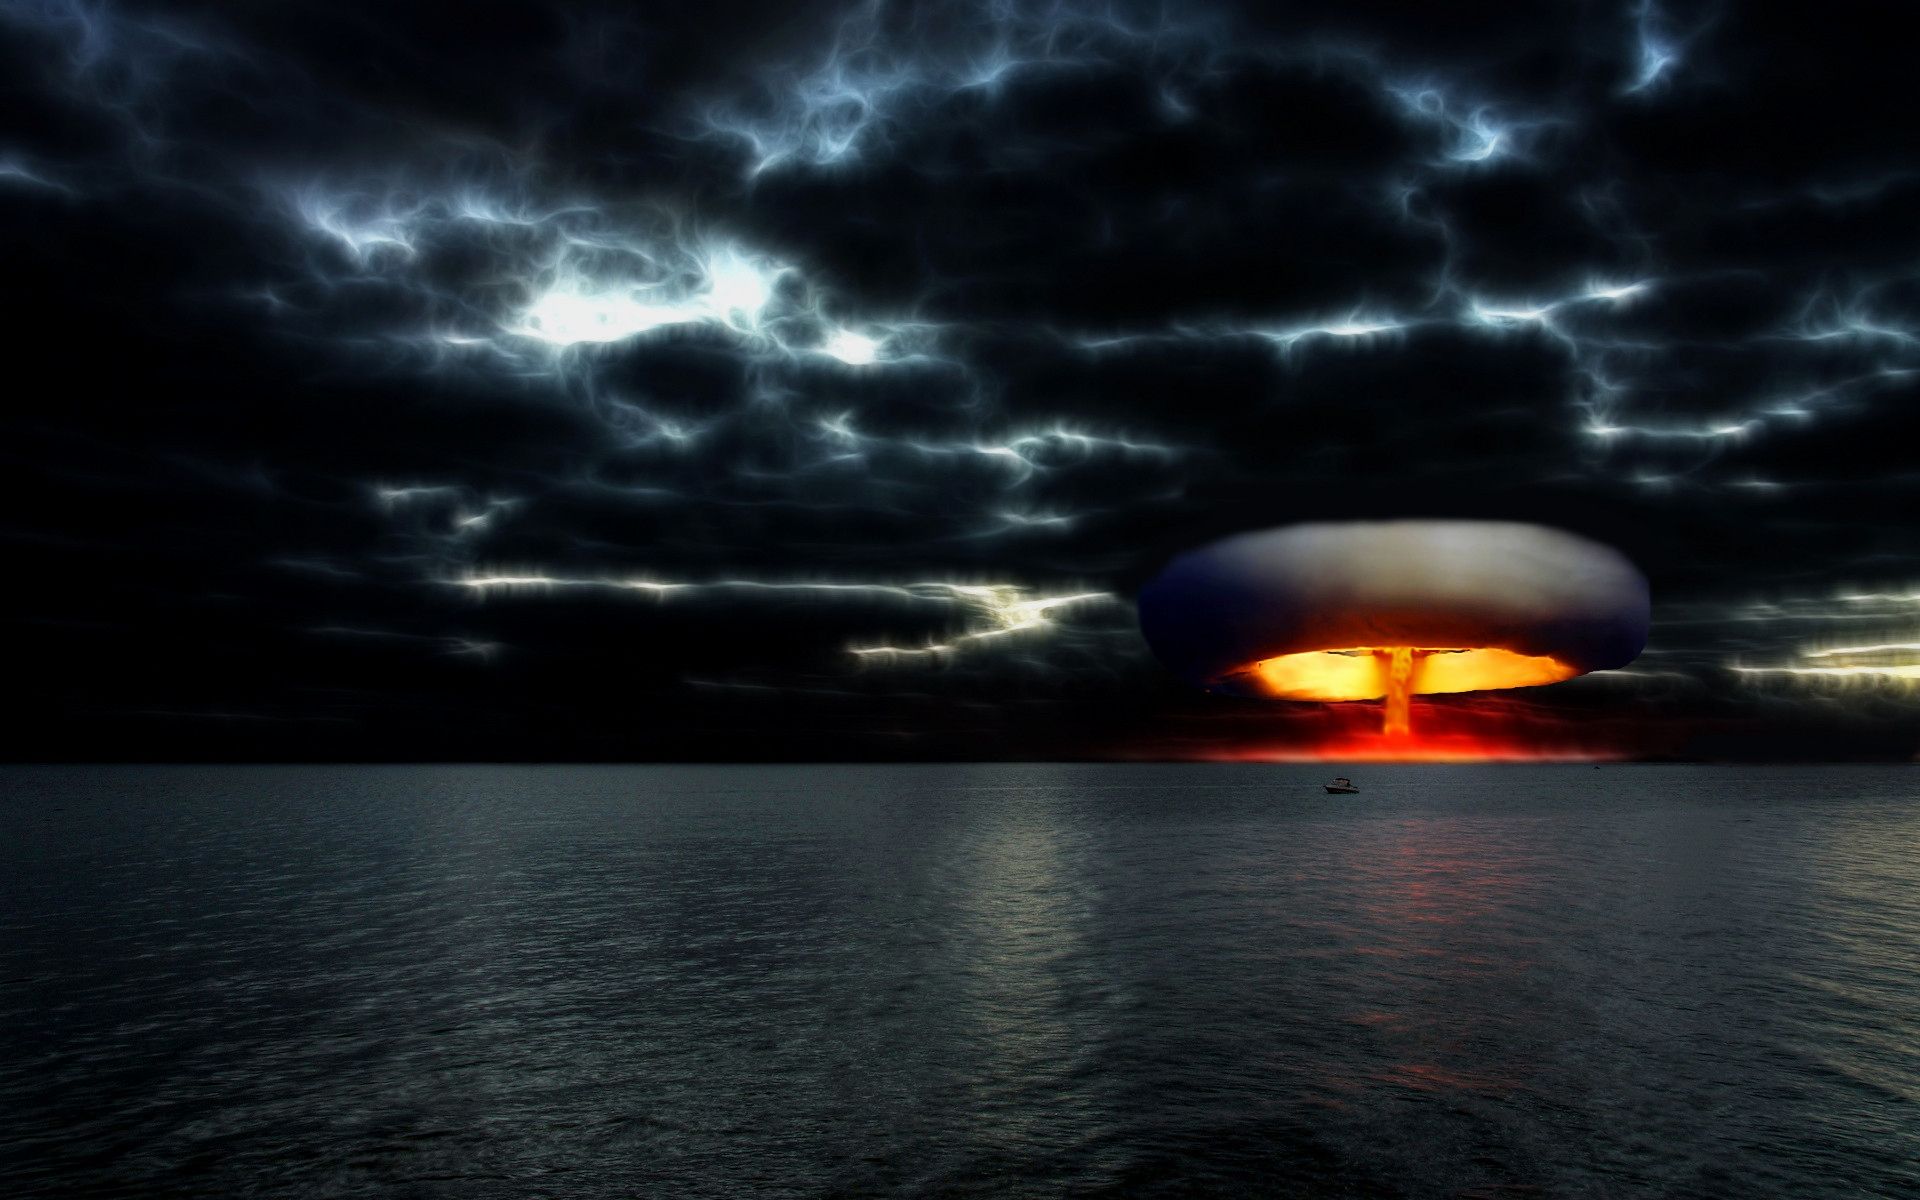 Nuclear Wallpaper Awesome [40 ] atomic Bomb Wallpaper HD On Wallpaperafari Of the Day of The Hudson